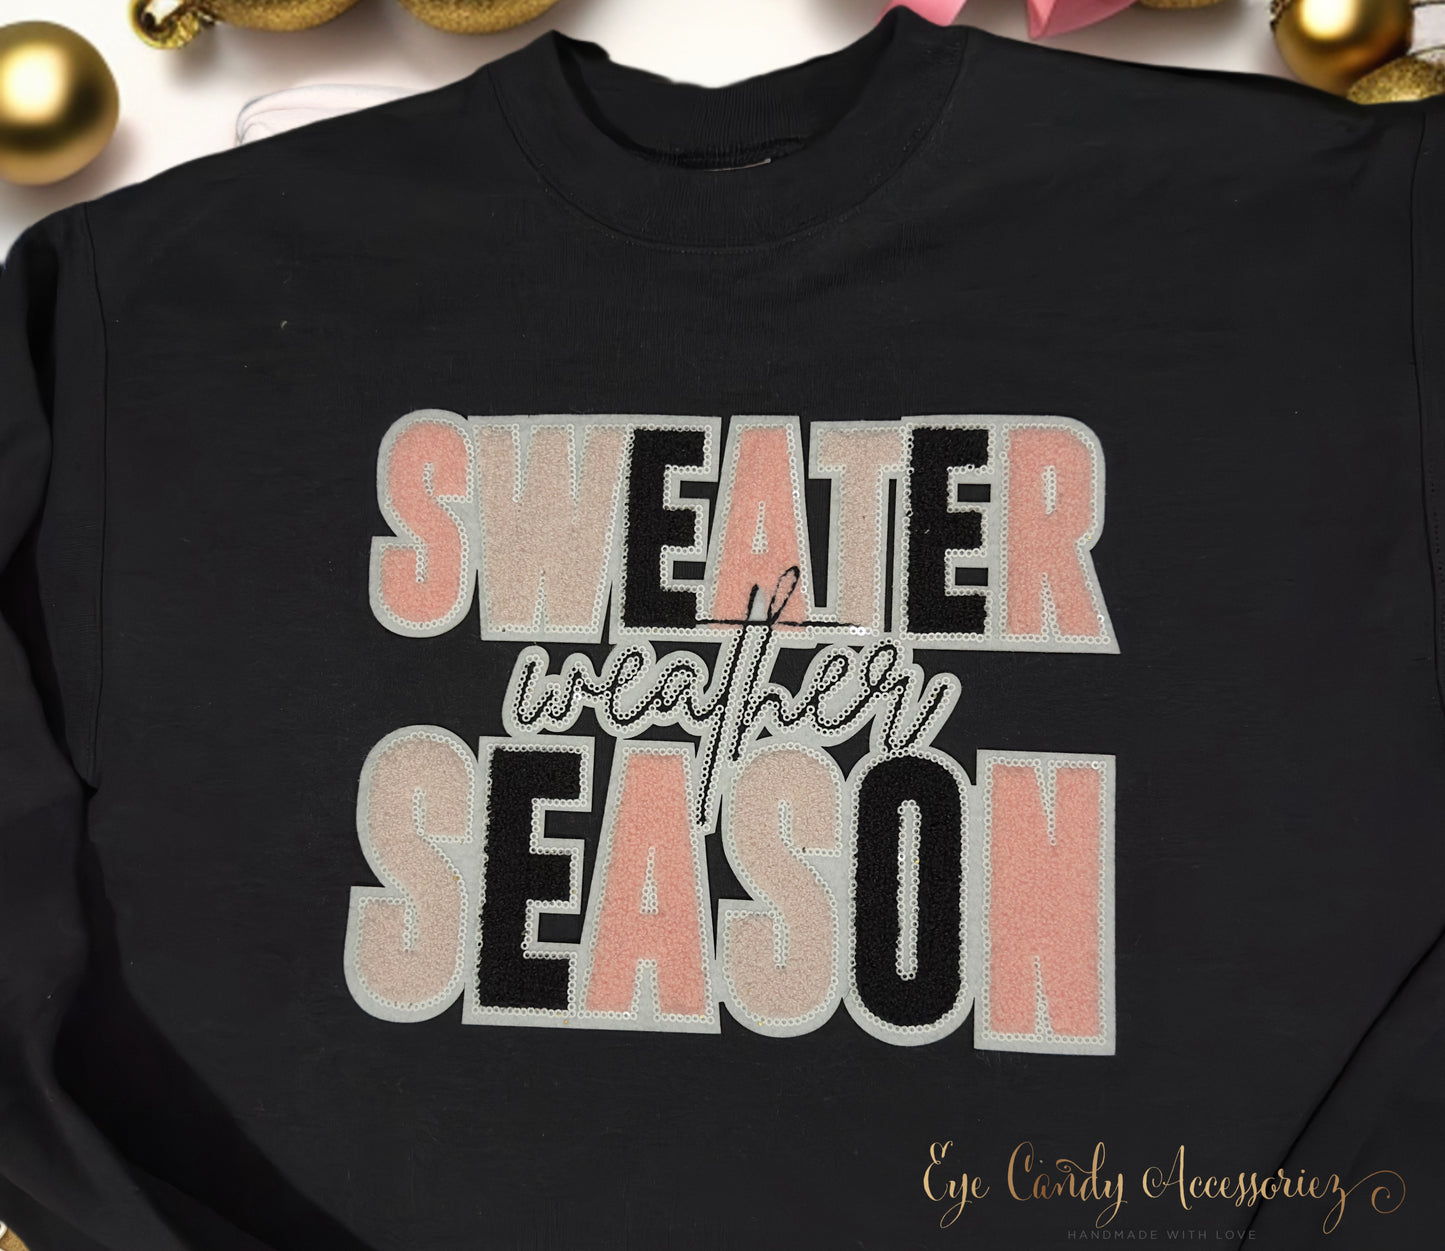 Sweater Weather Season Chenille Patch- Adult Unisex Sweater